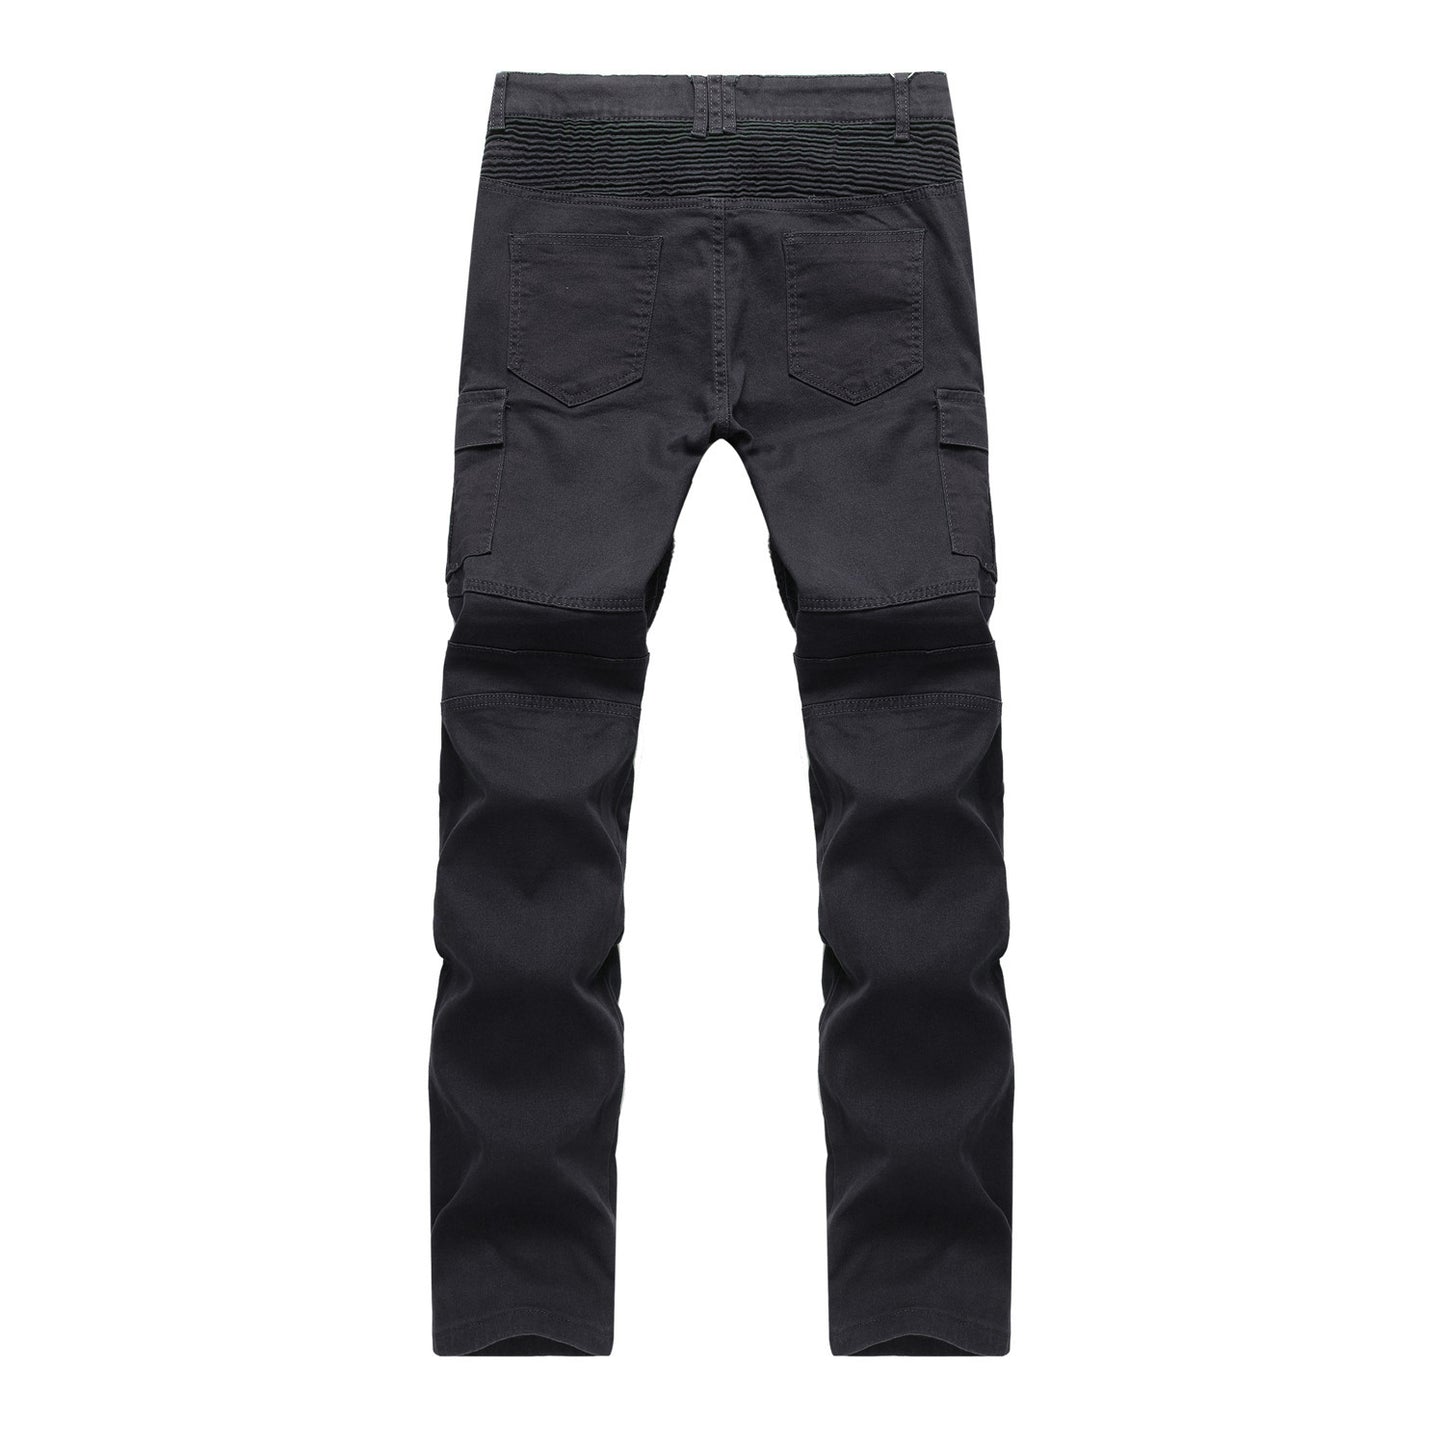 Men's Motorcycle Trousers Black Jeans Folds Motorcycle Trousers